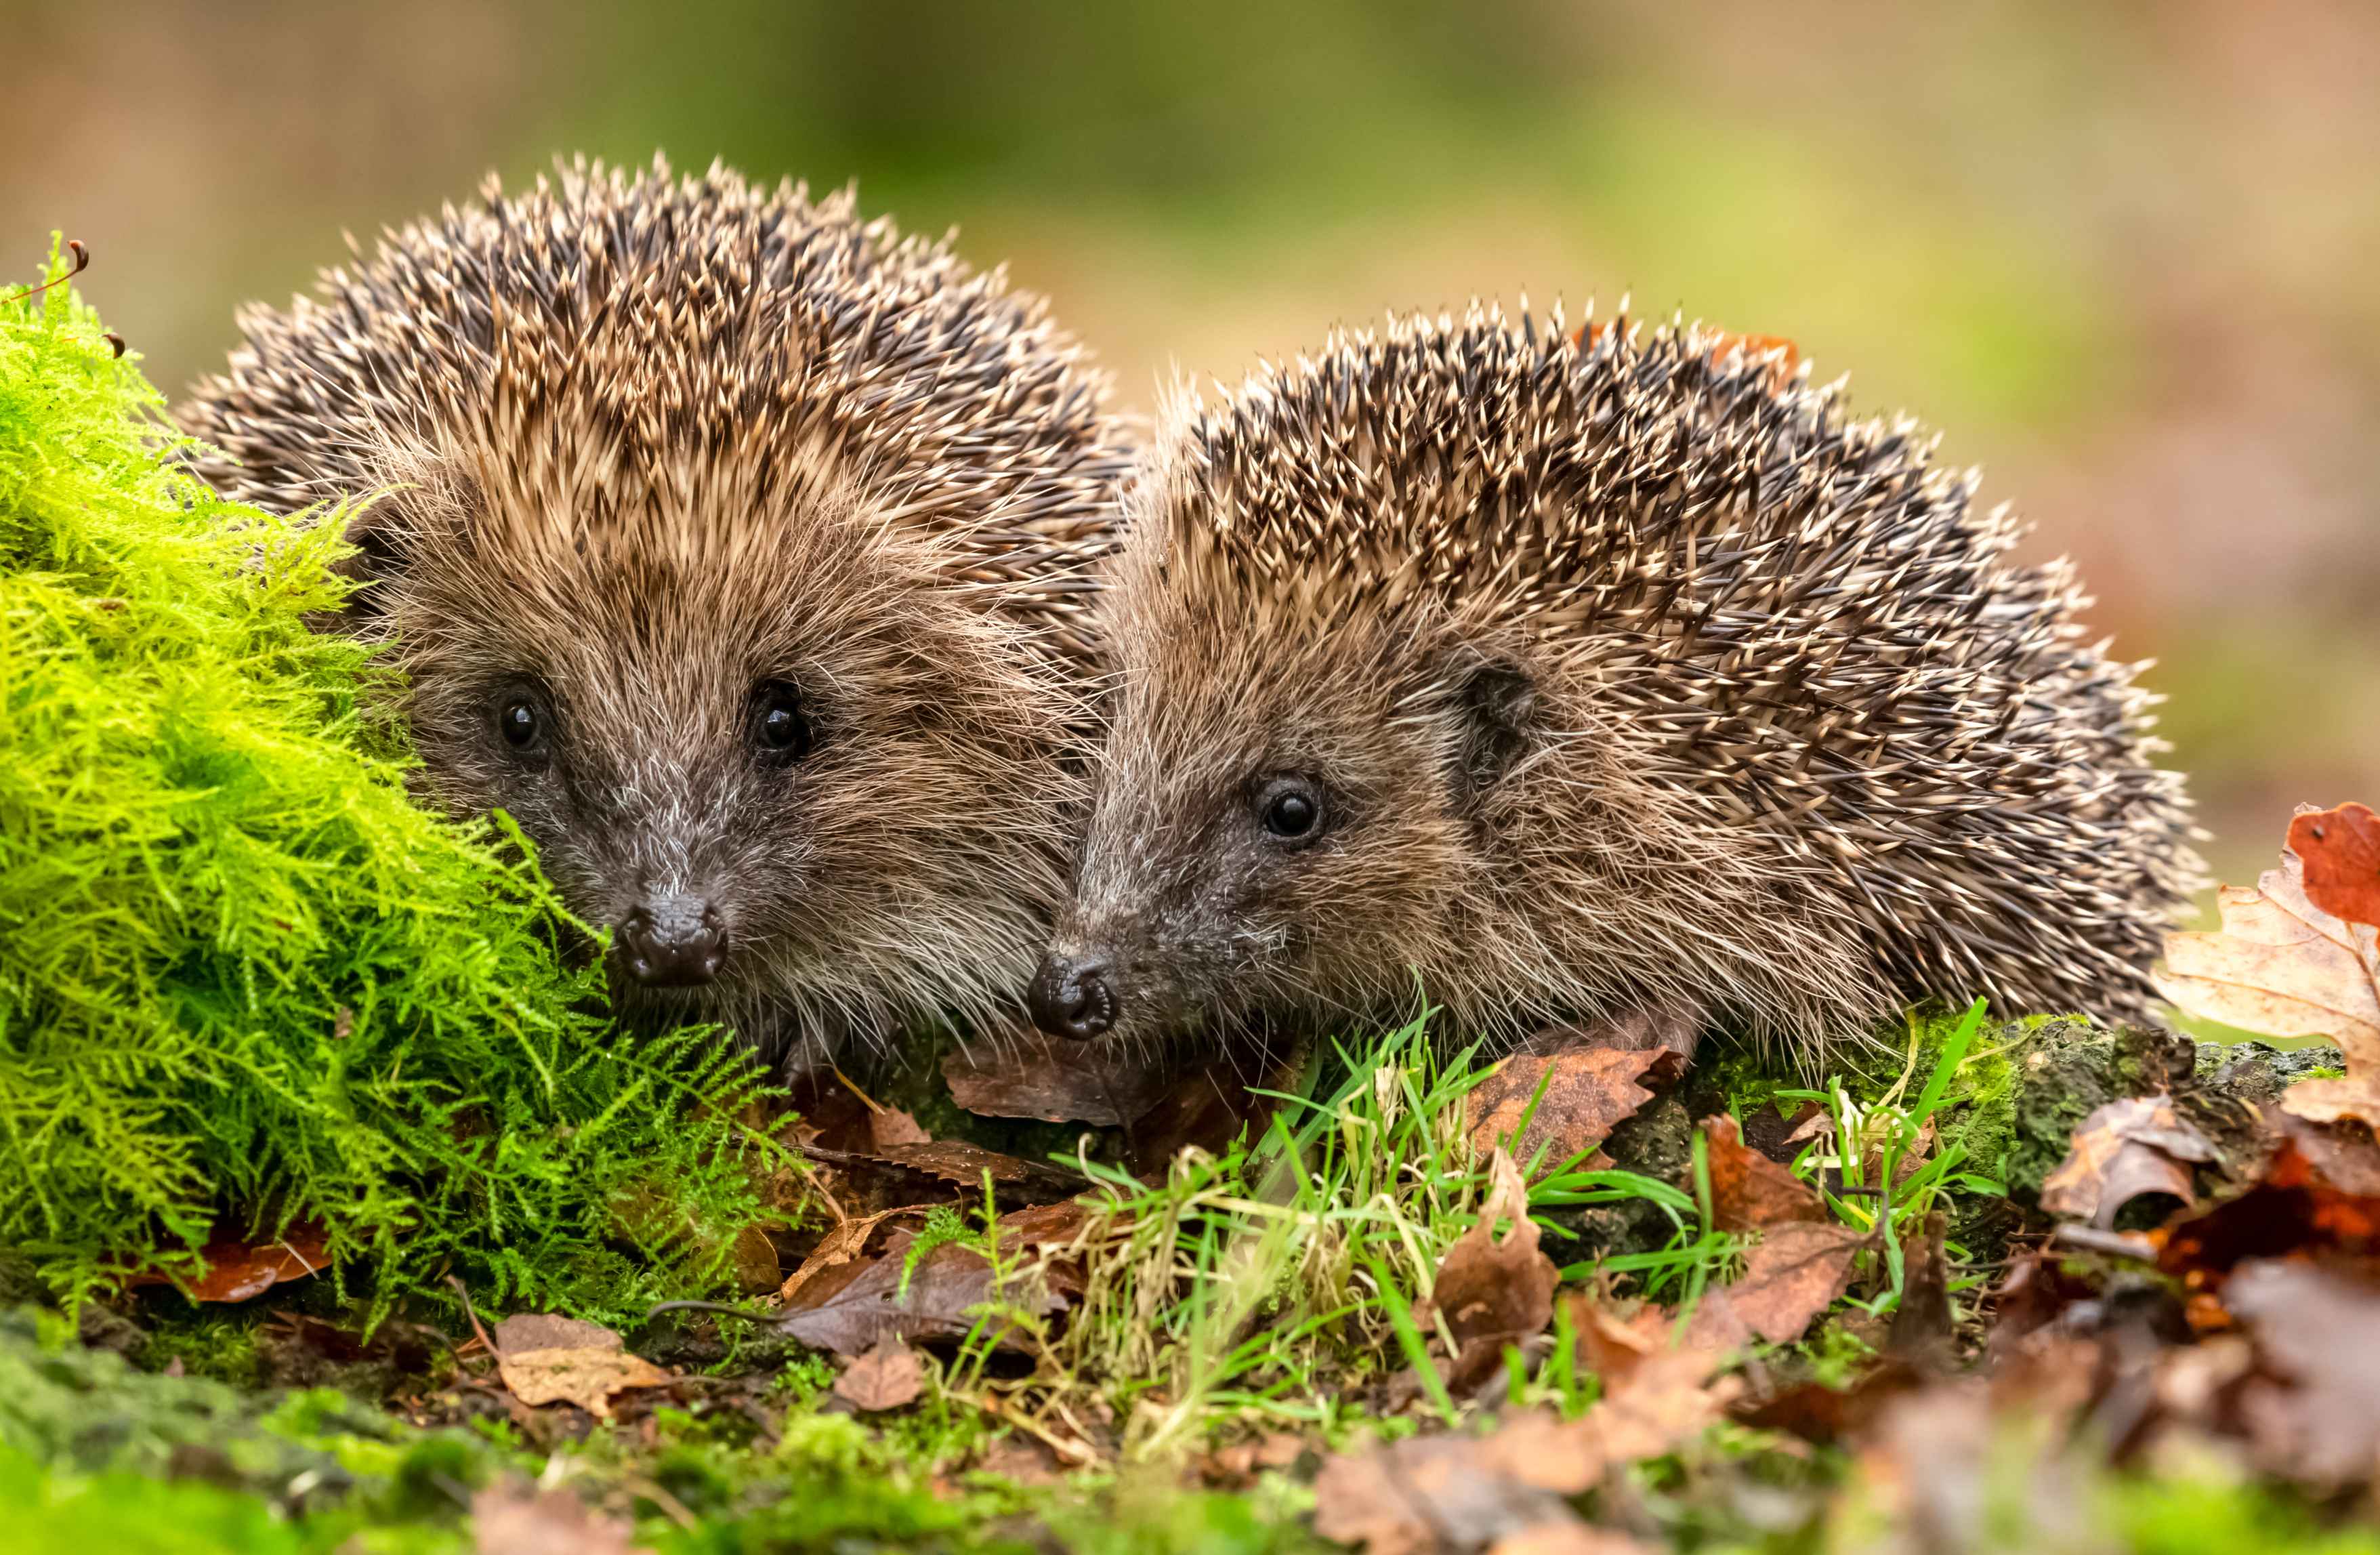 two hedgehogs in natural rural environment